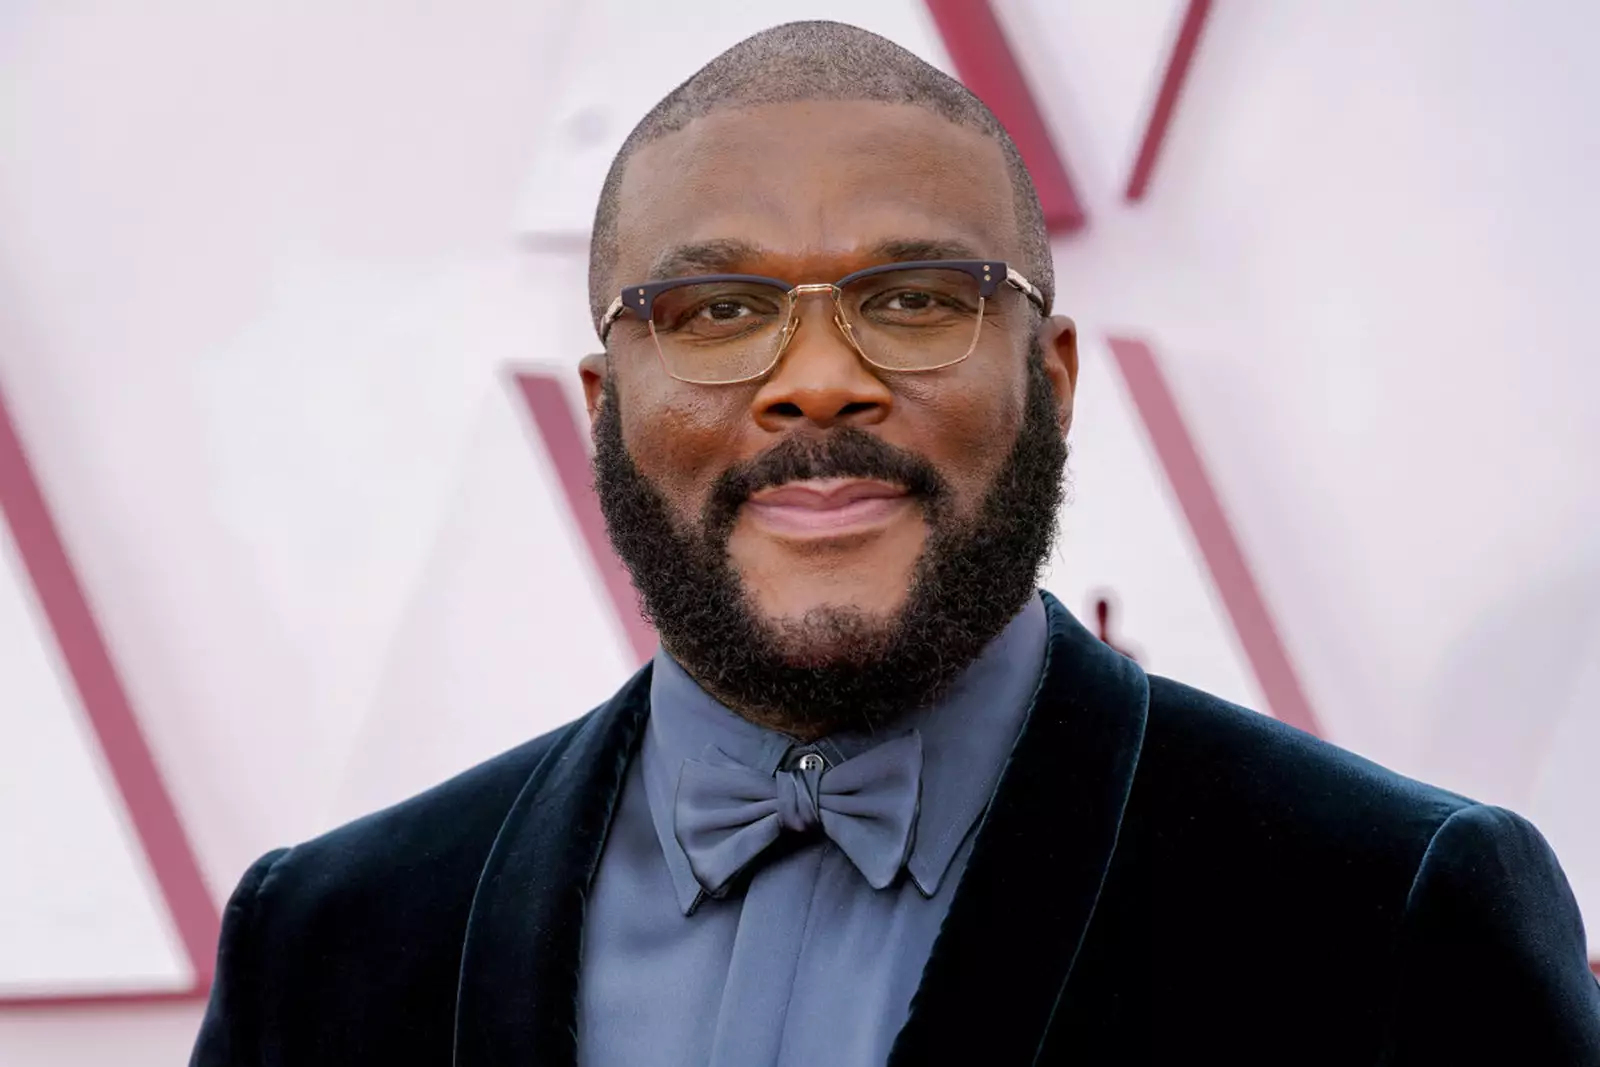 EVEN TYLER PERRY COULDN'T MISS THE "RENAISSANCE" TOUR KICKOFF 14